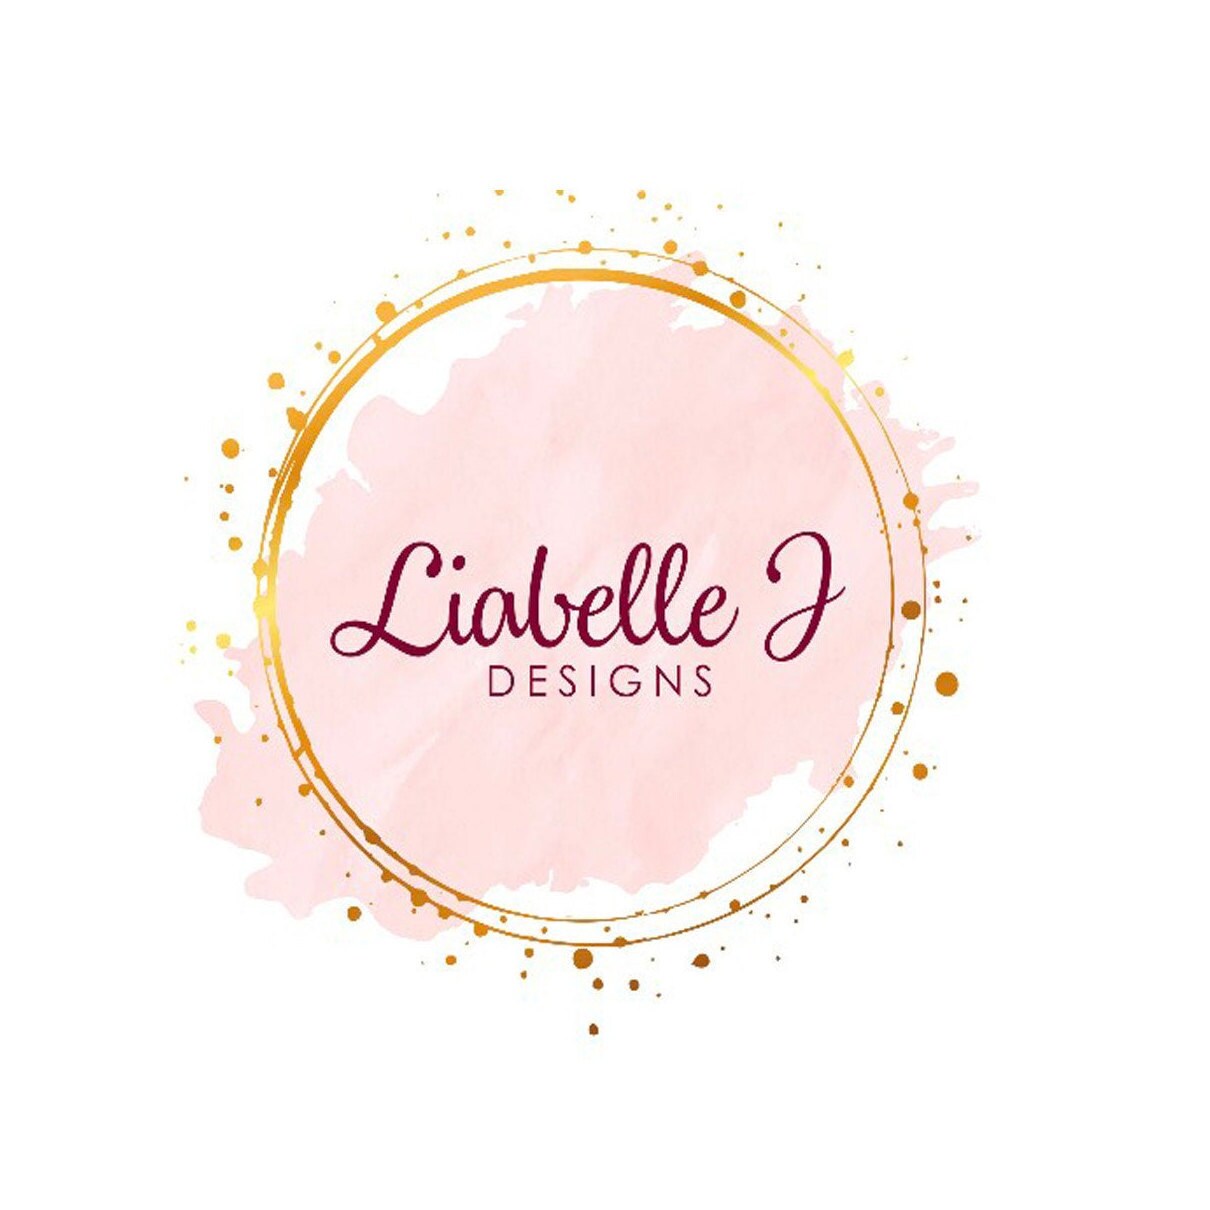 LiabelleJDesigns - Etsy